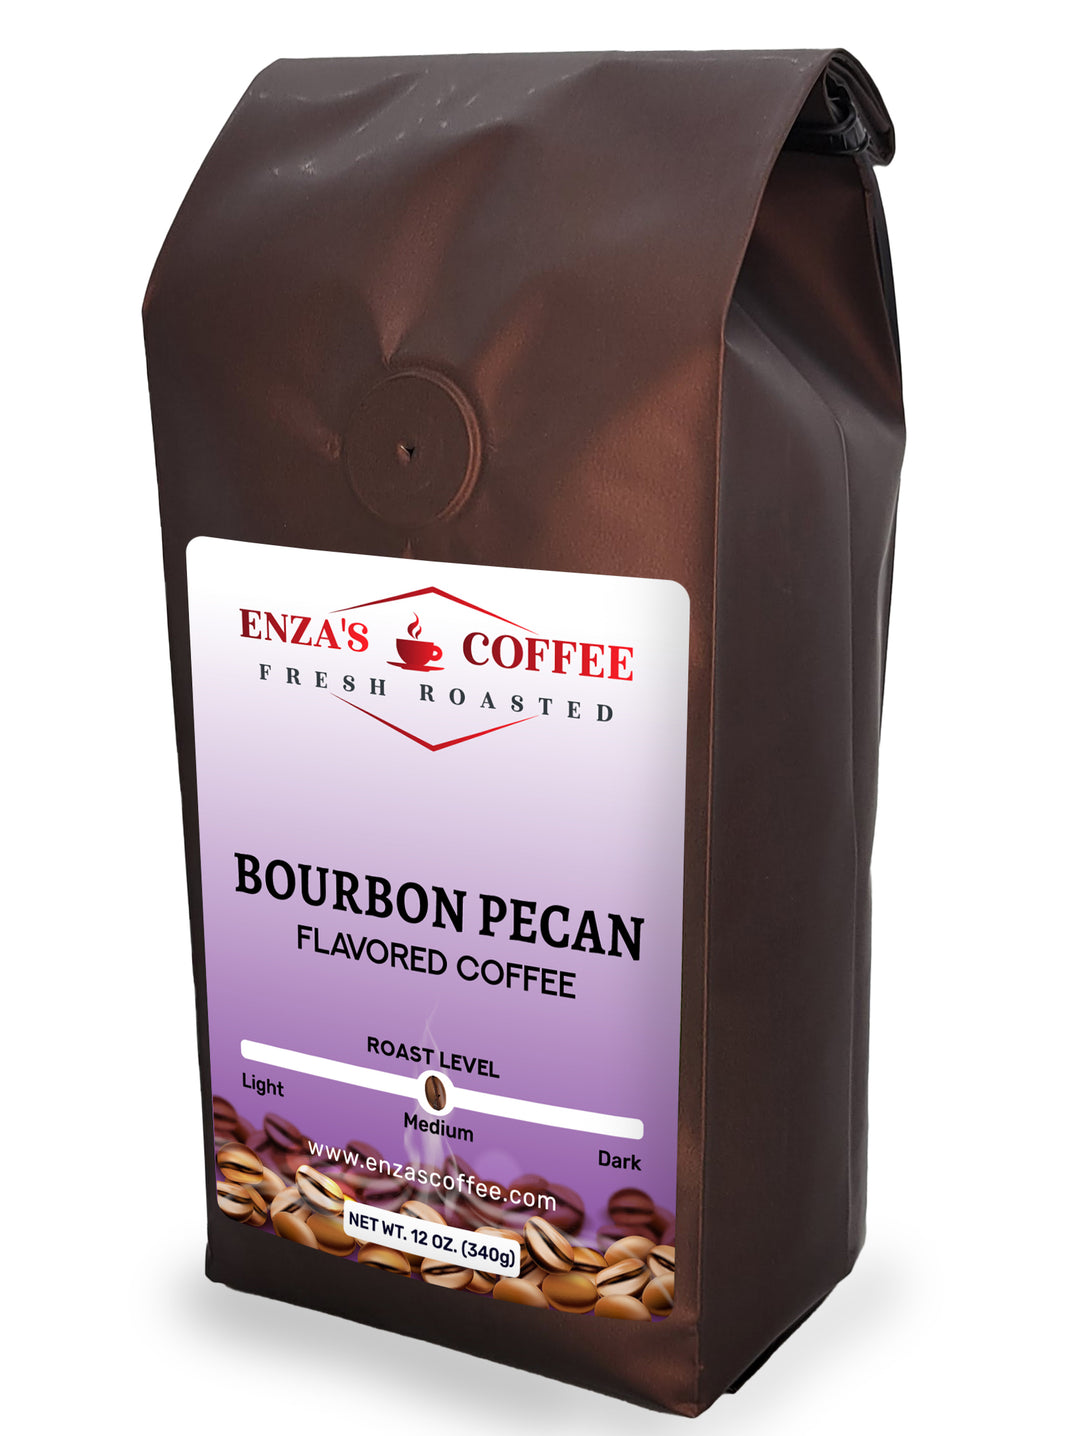 Savor the Richness: Bourbon Pecan Coffee from Enza's Coffee, Hot or Iced!